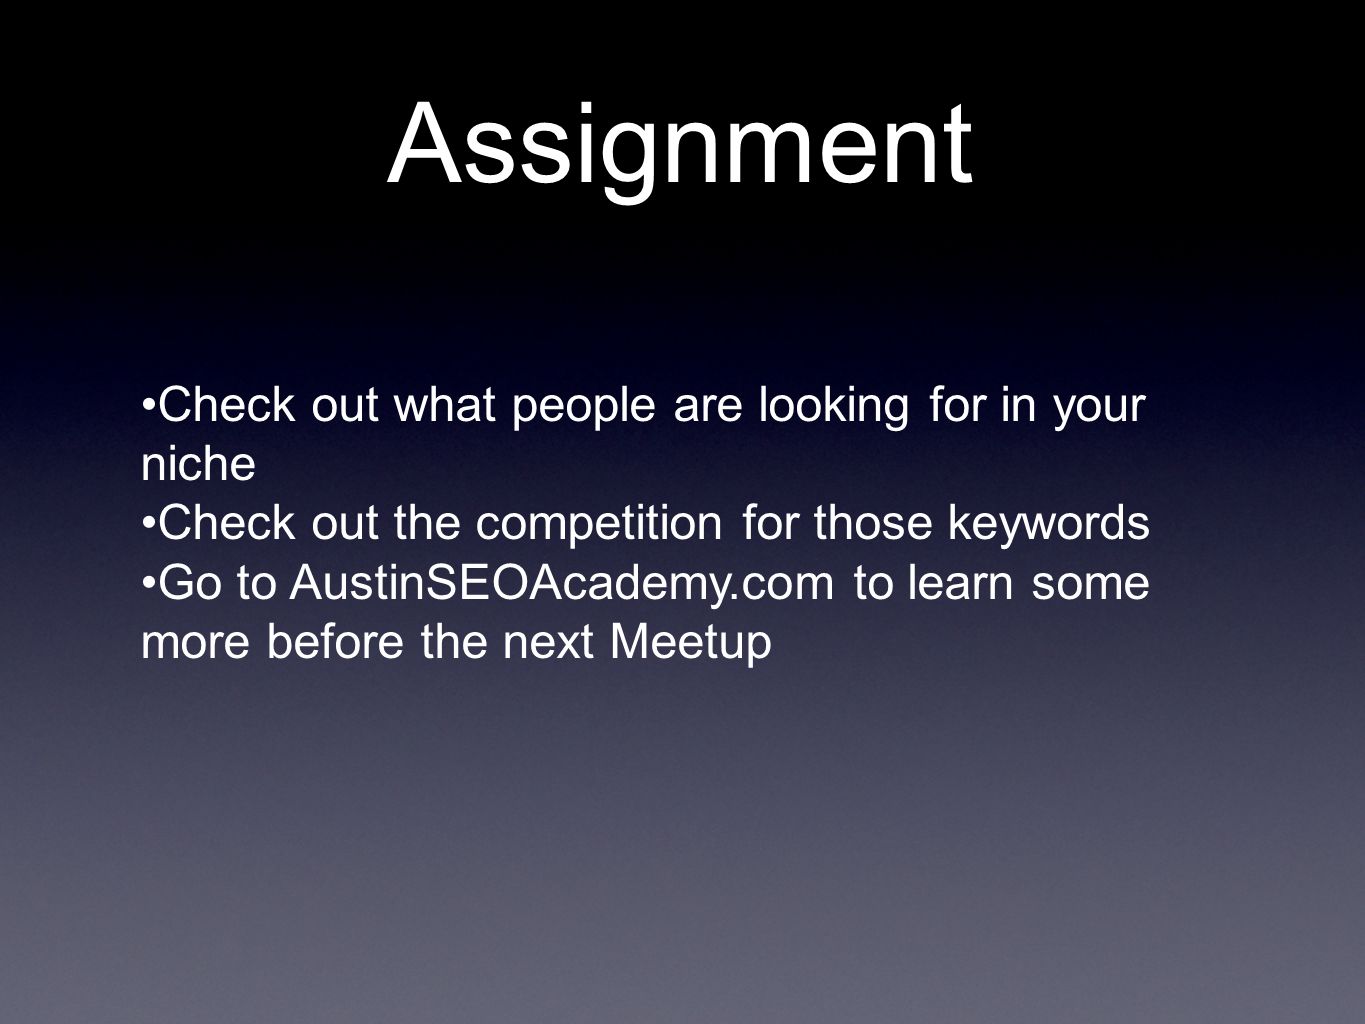 Assignment Check out what people are looking for in your niche Check out the competition for those keywords Go to AustinSEOAcademy.com to learn some more before the next Meetup